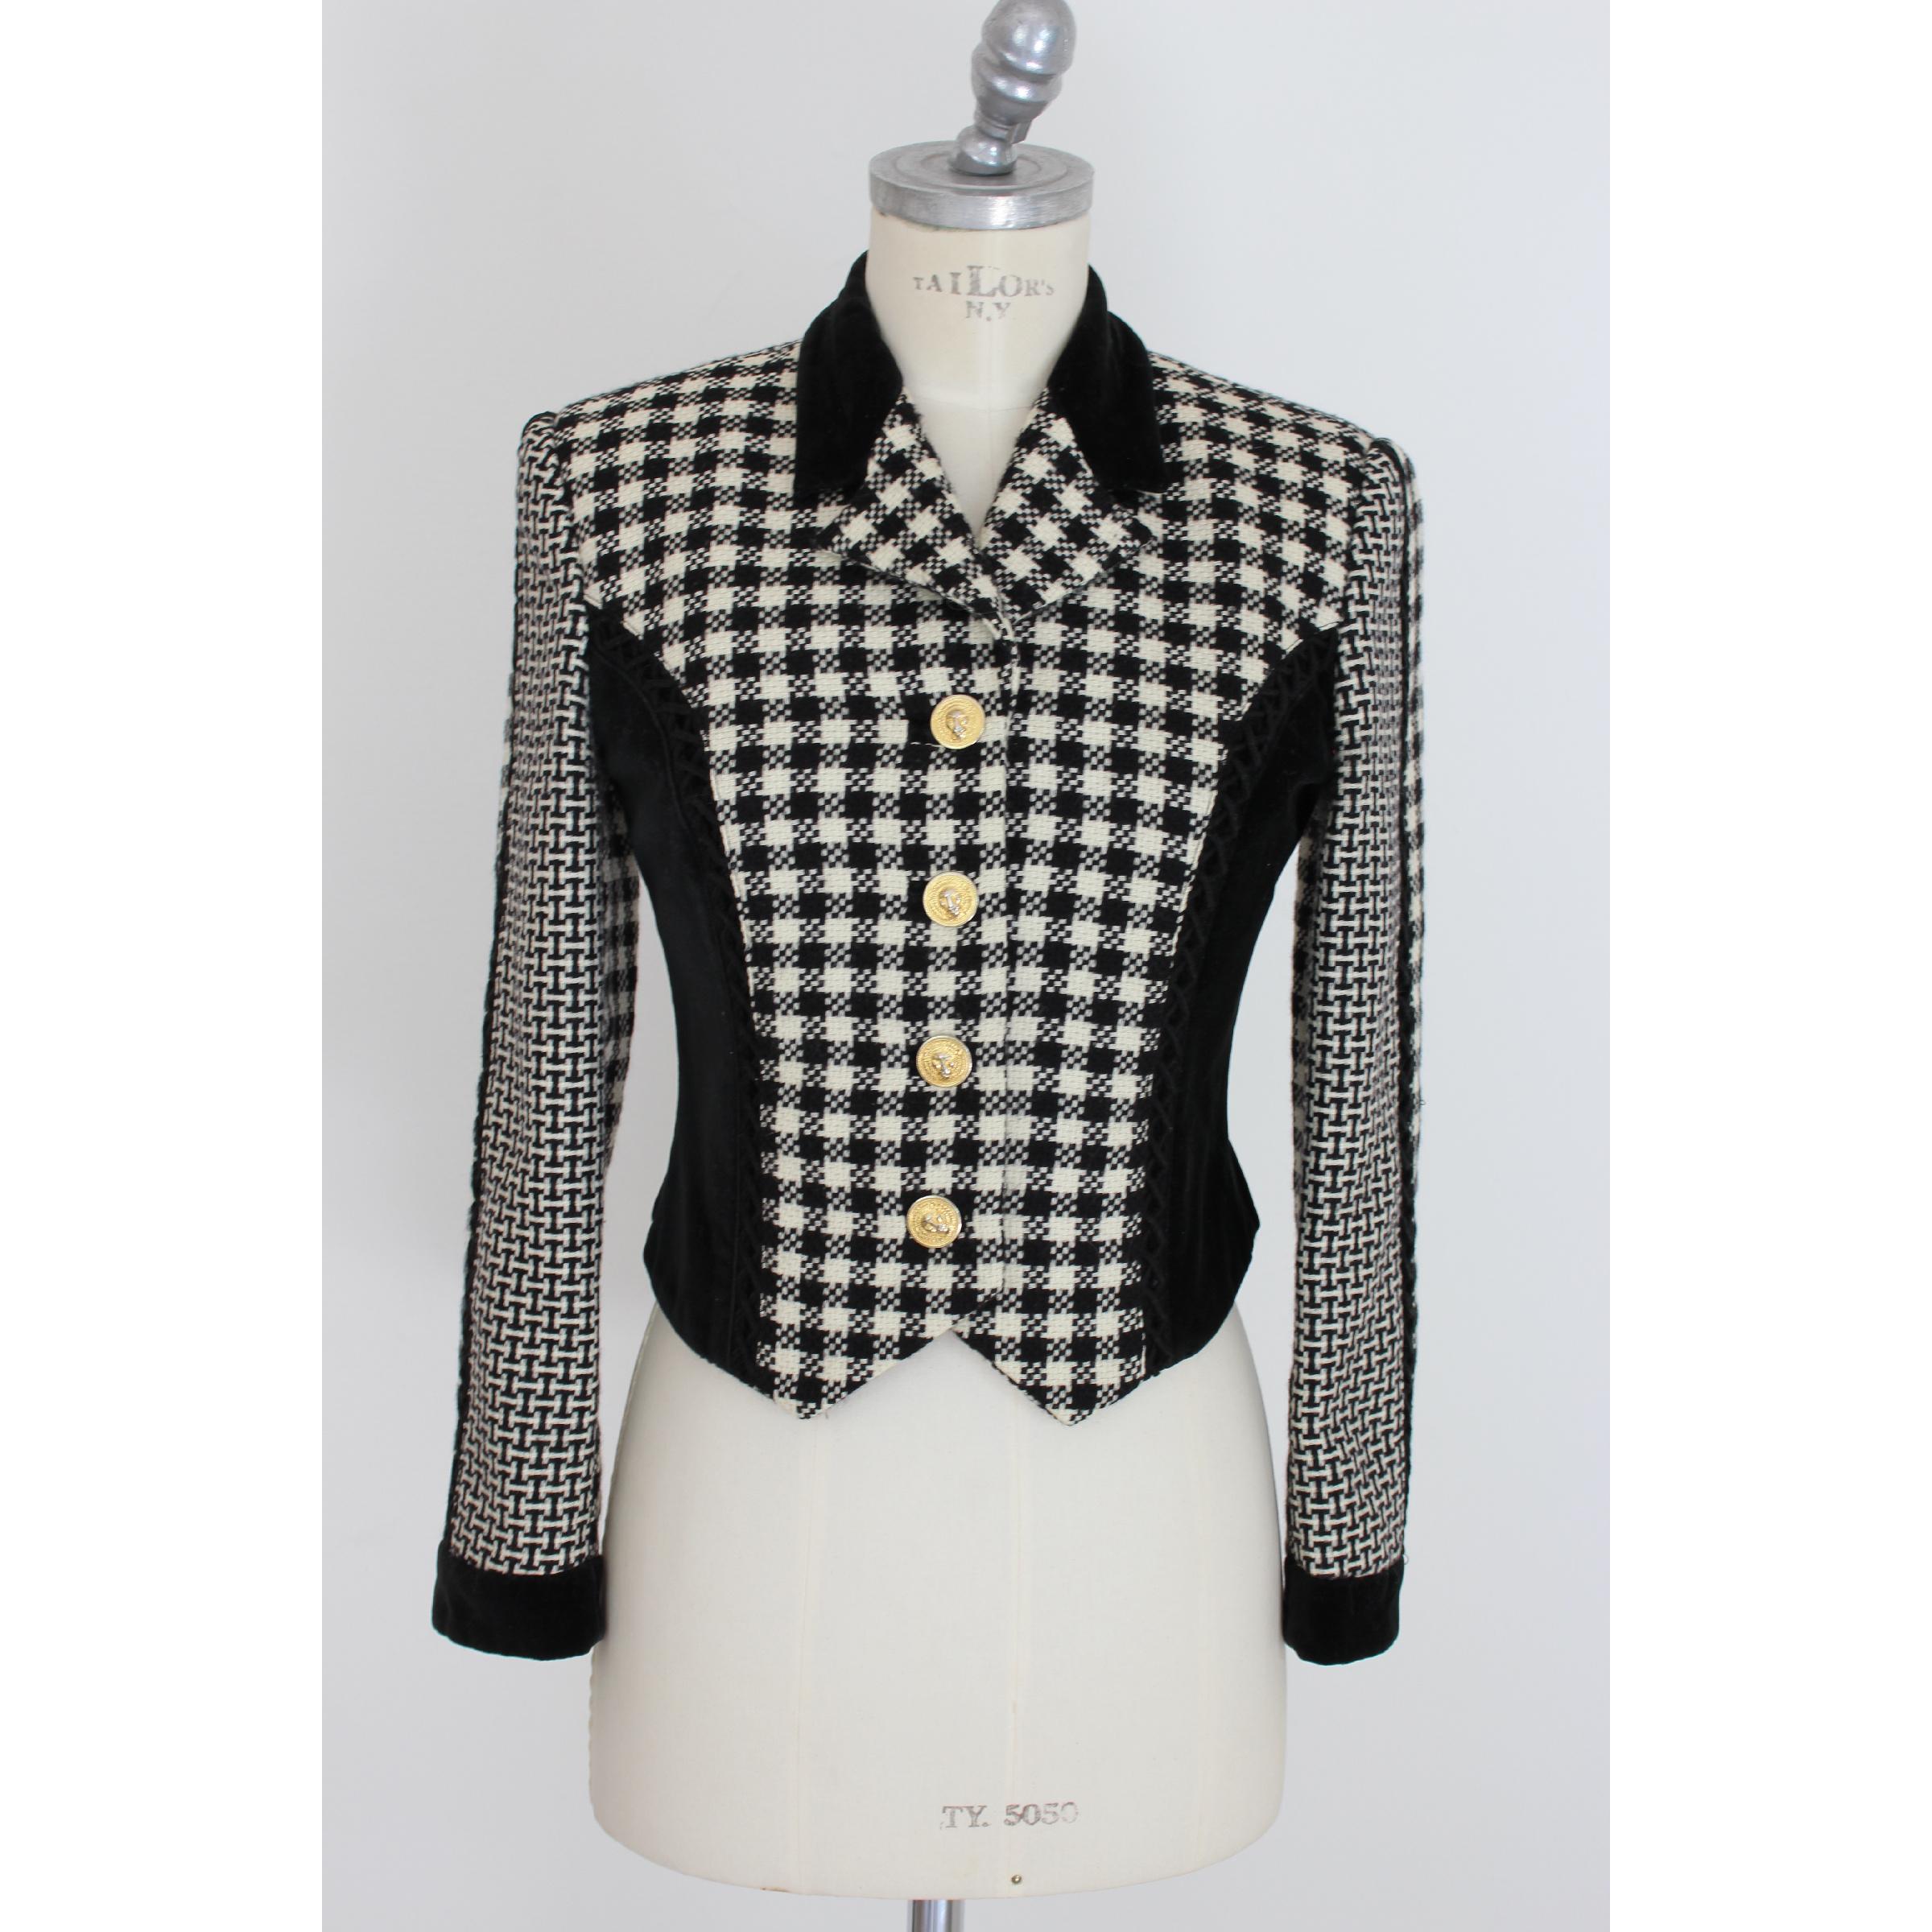 Vintage jacket Versus Gianni Versace 1980s, flared model, black and white pied de poule in wool, print with interwoven details along the bust and velvet collar. Closure with gold-colored buttons. Made in Italy. Very good vintage conditions.

Size: